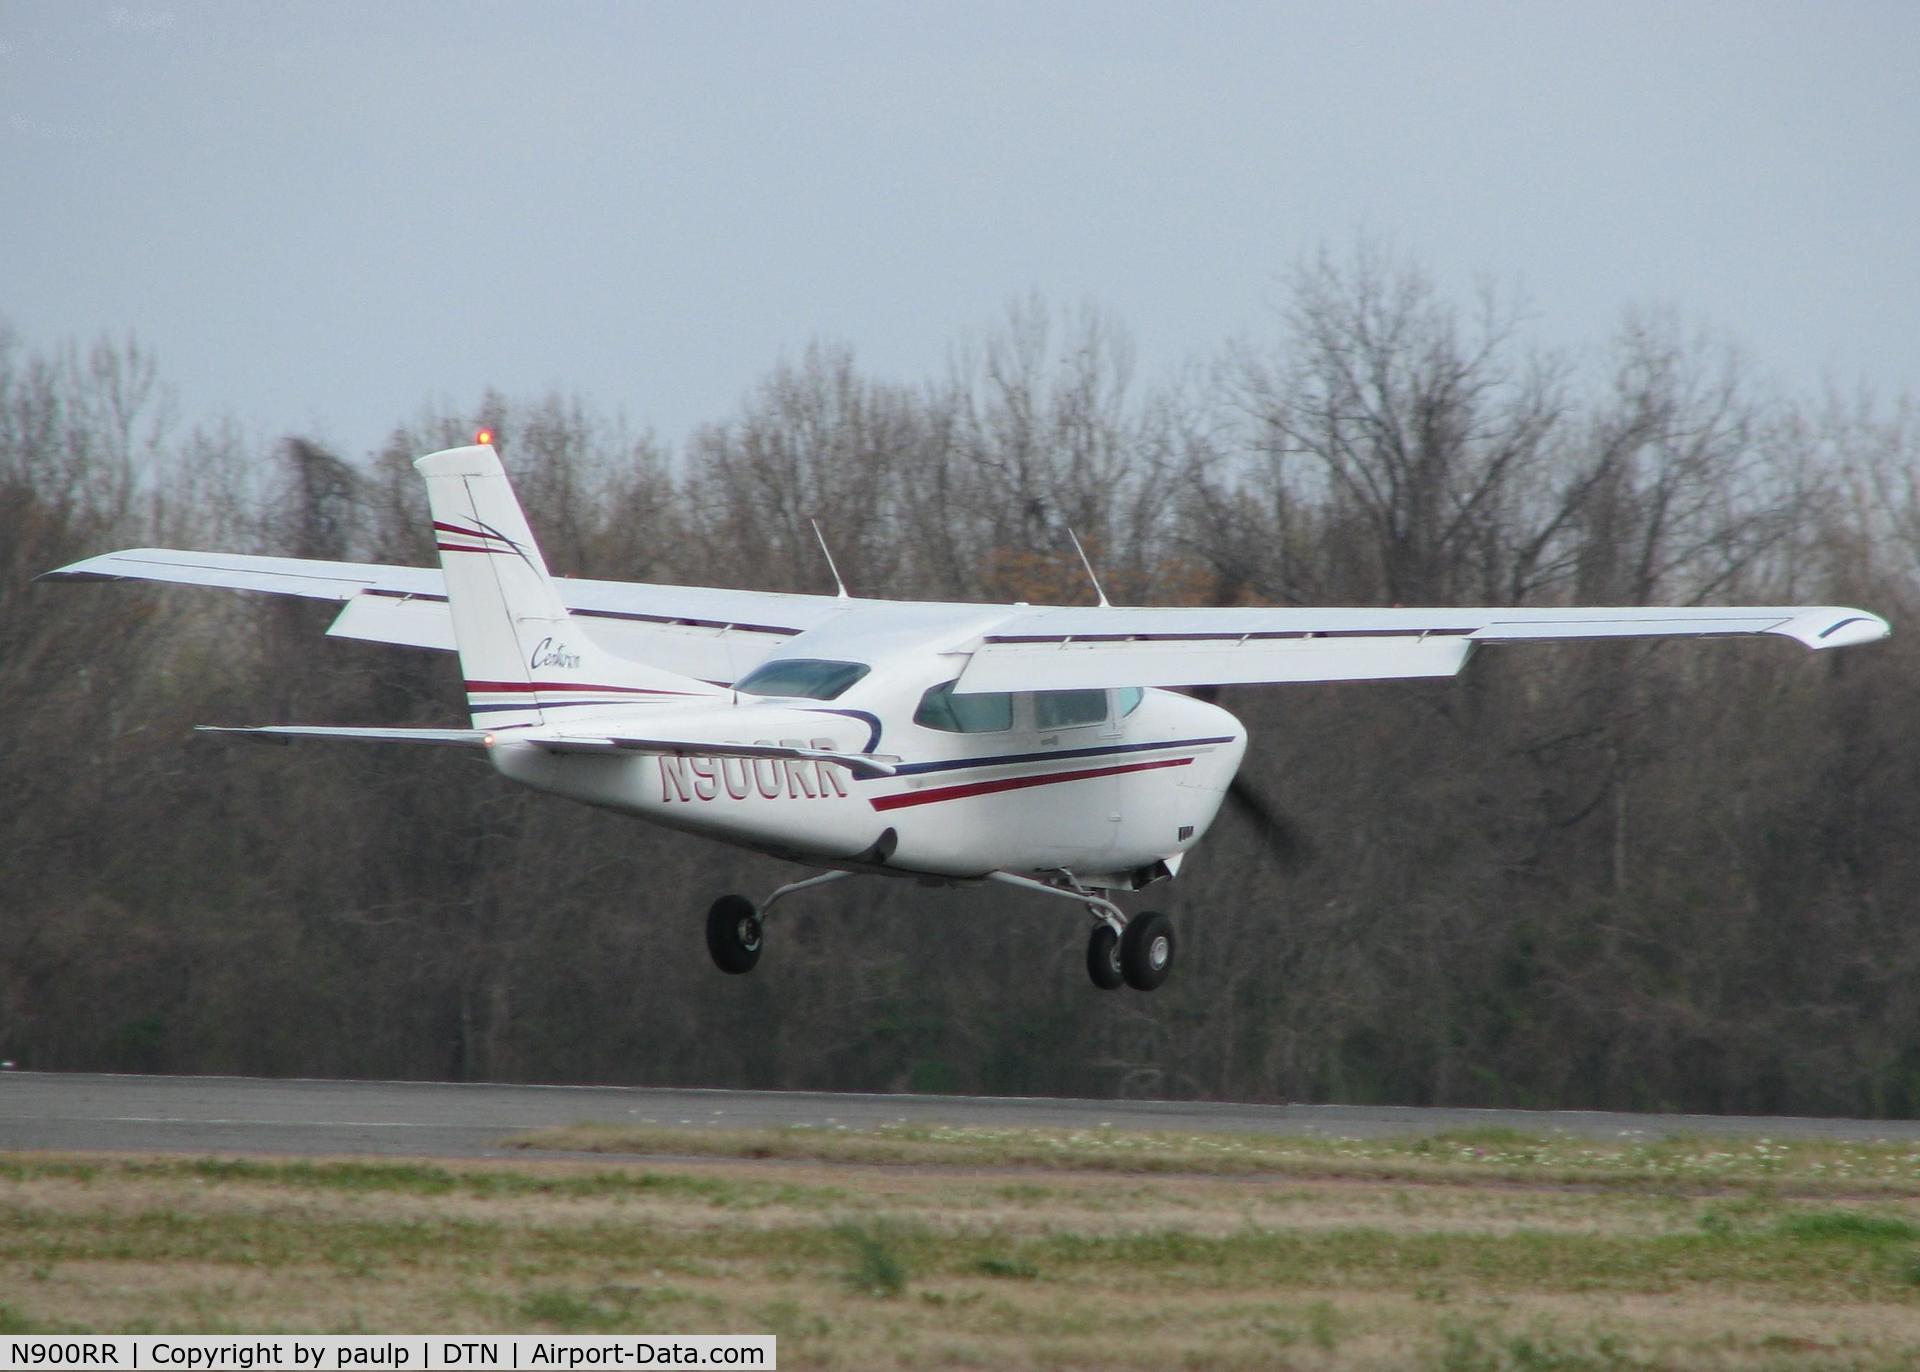 N900RR, 1982 Cessna 210N Centurion C/N 21064676, Touching down on runway 14 at the Shreveport Downtown airport.